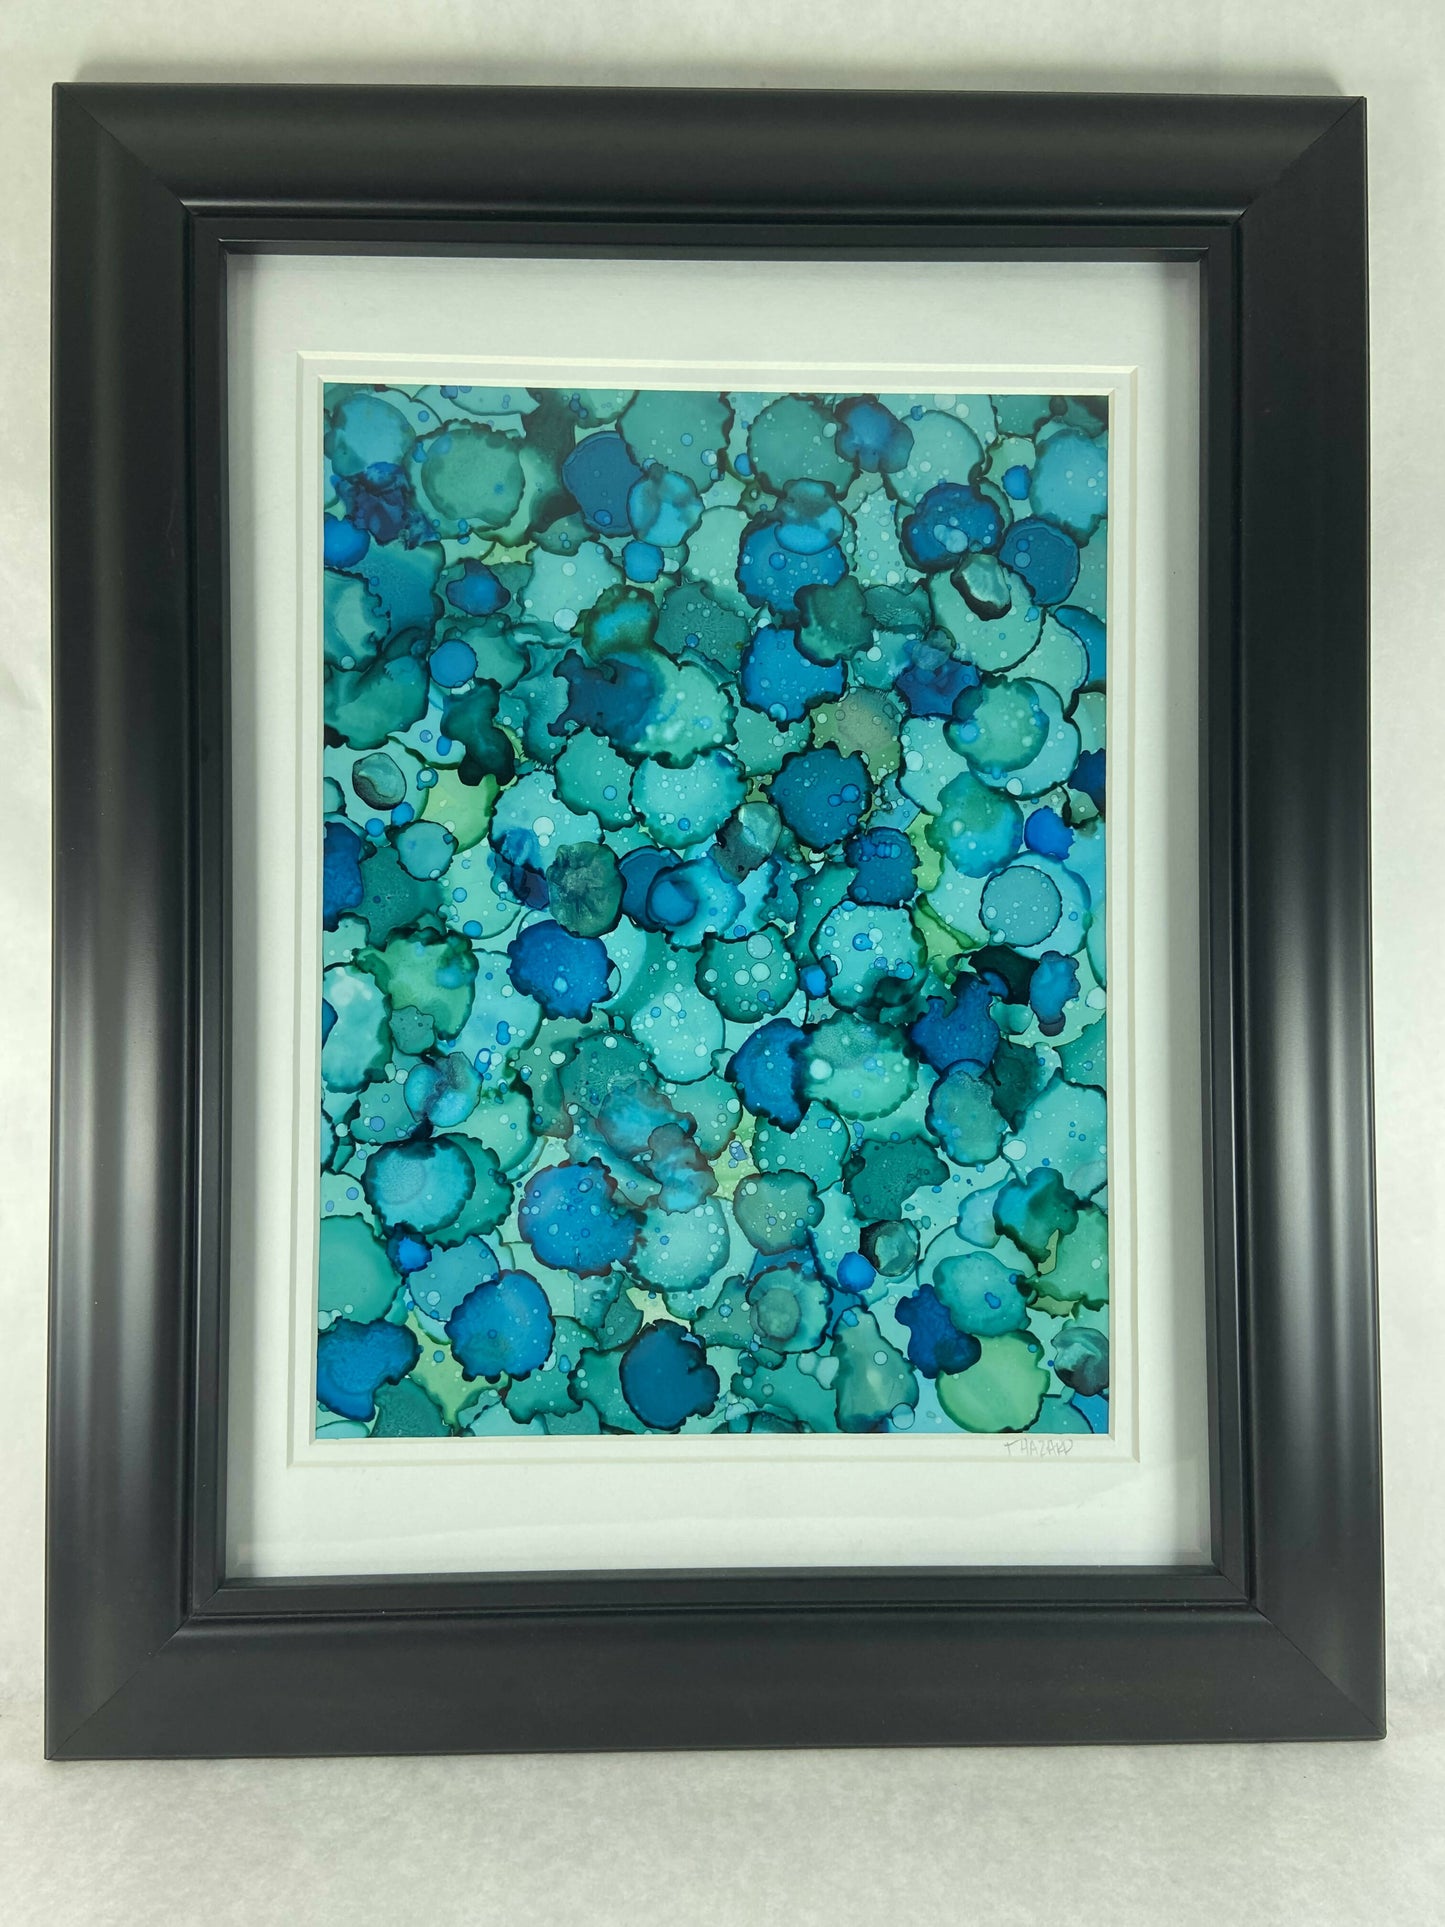 Framed Alcohol Ink Lily Pad Art On Yupo 12x16